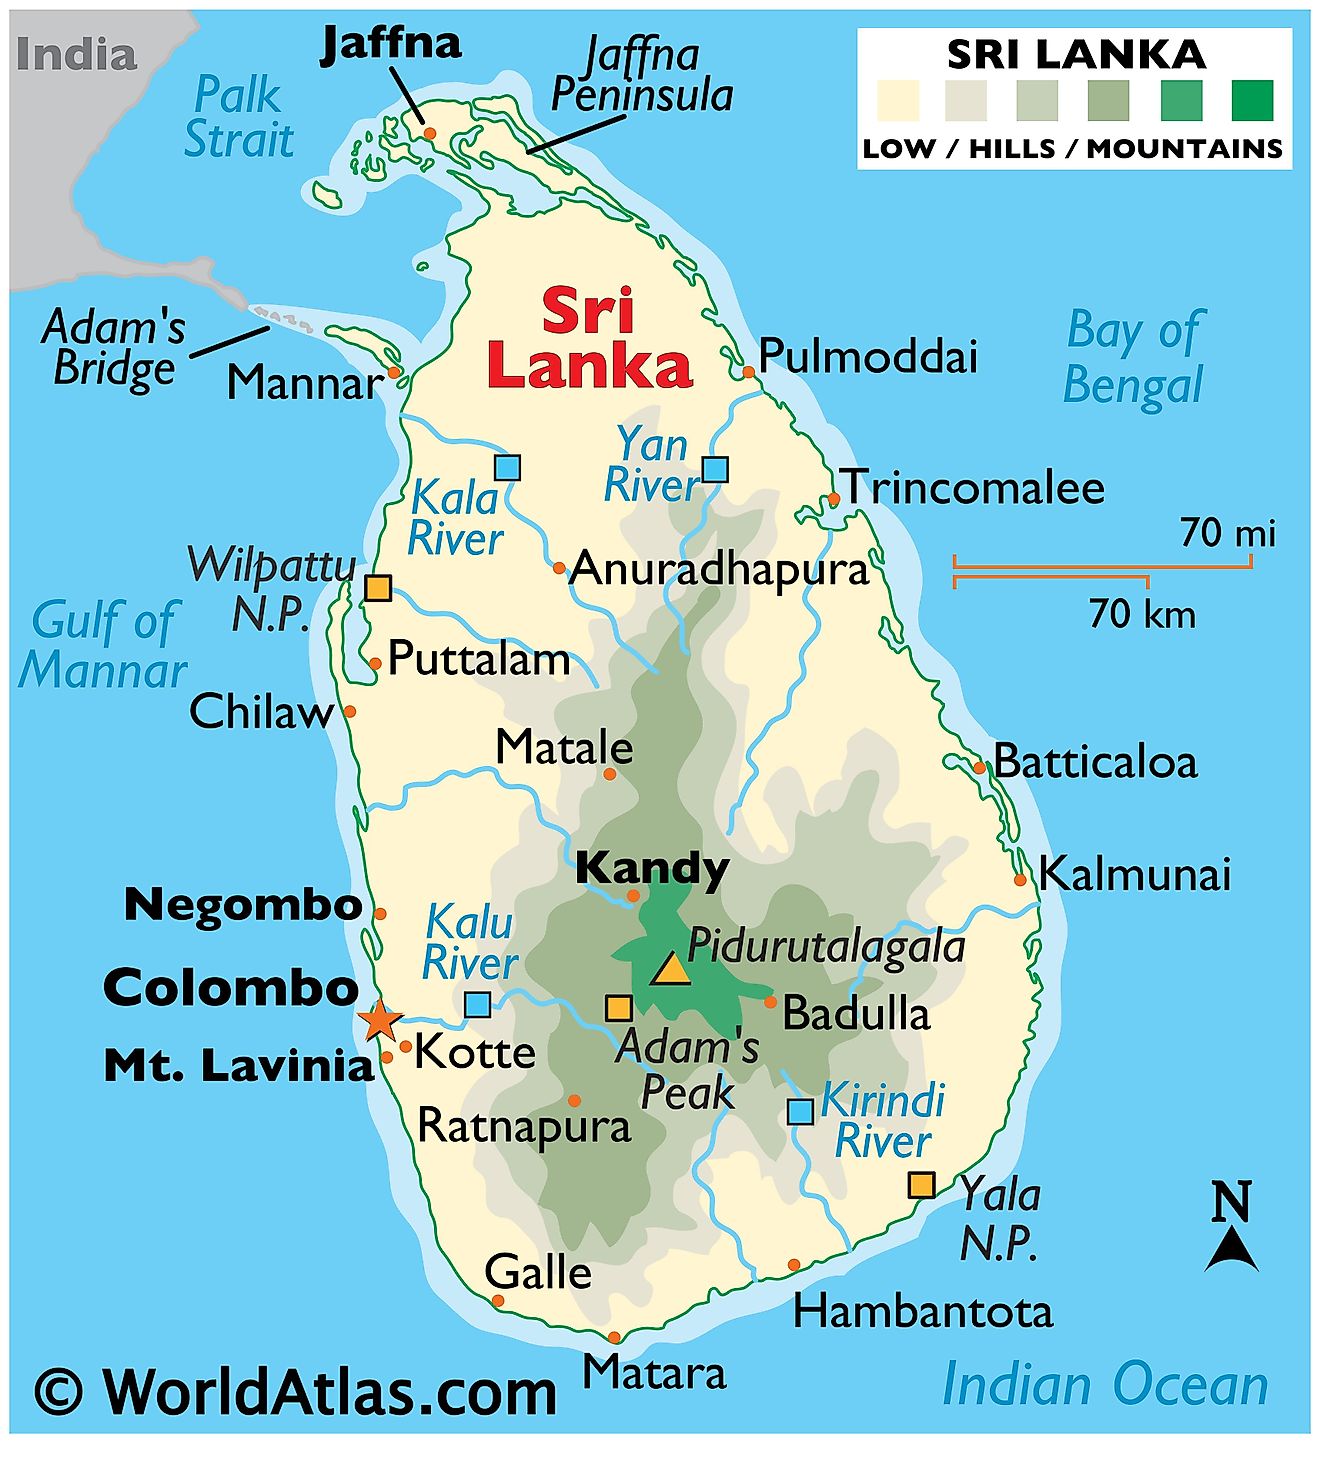 Physical Map of Sri Lanka showing state boundaries, relief, major rivers, highest point, important cities, national parks, and more.